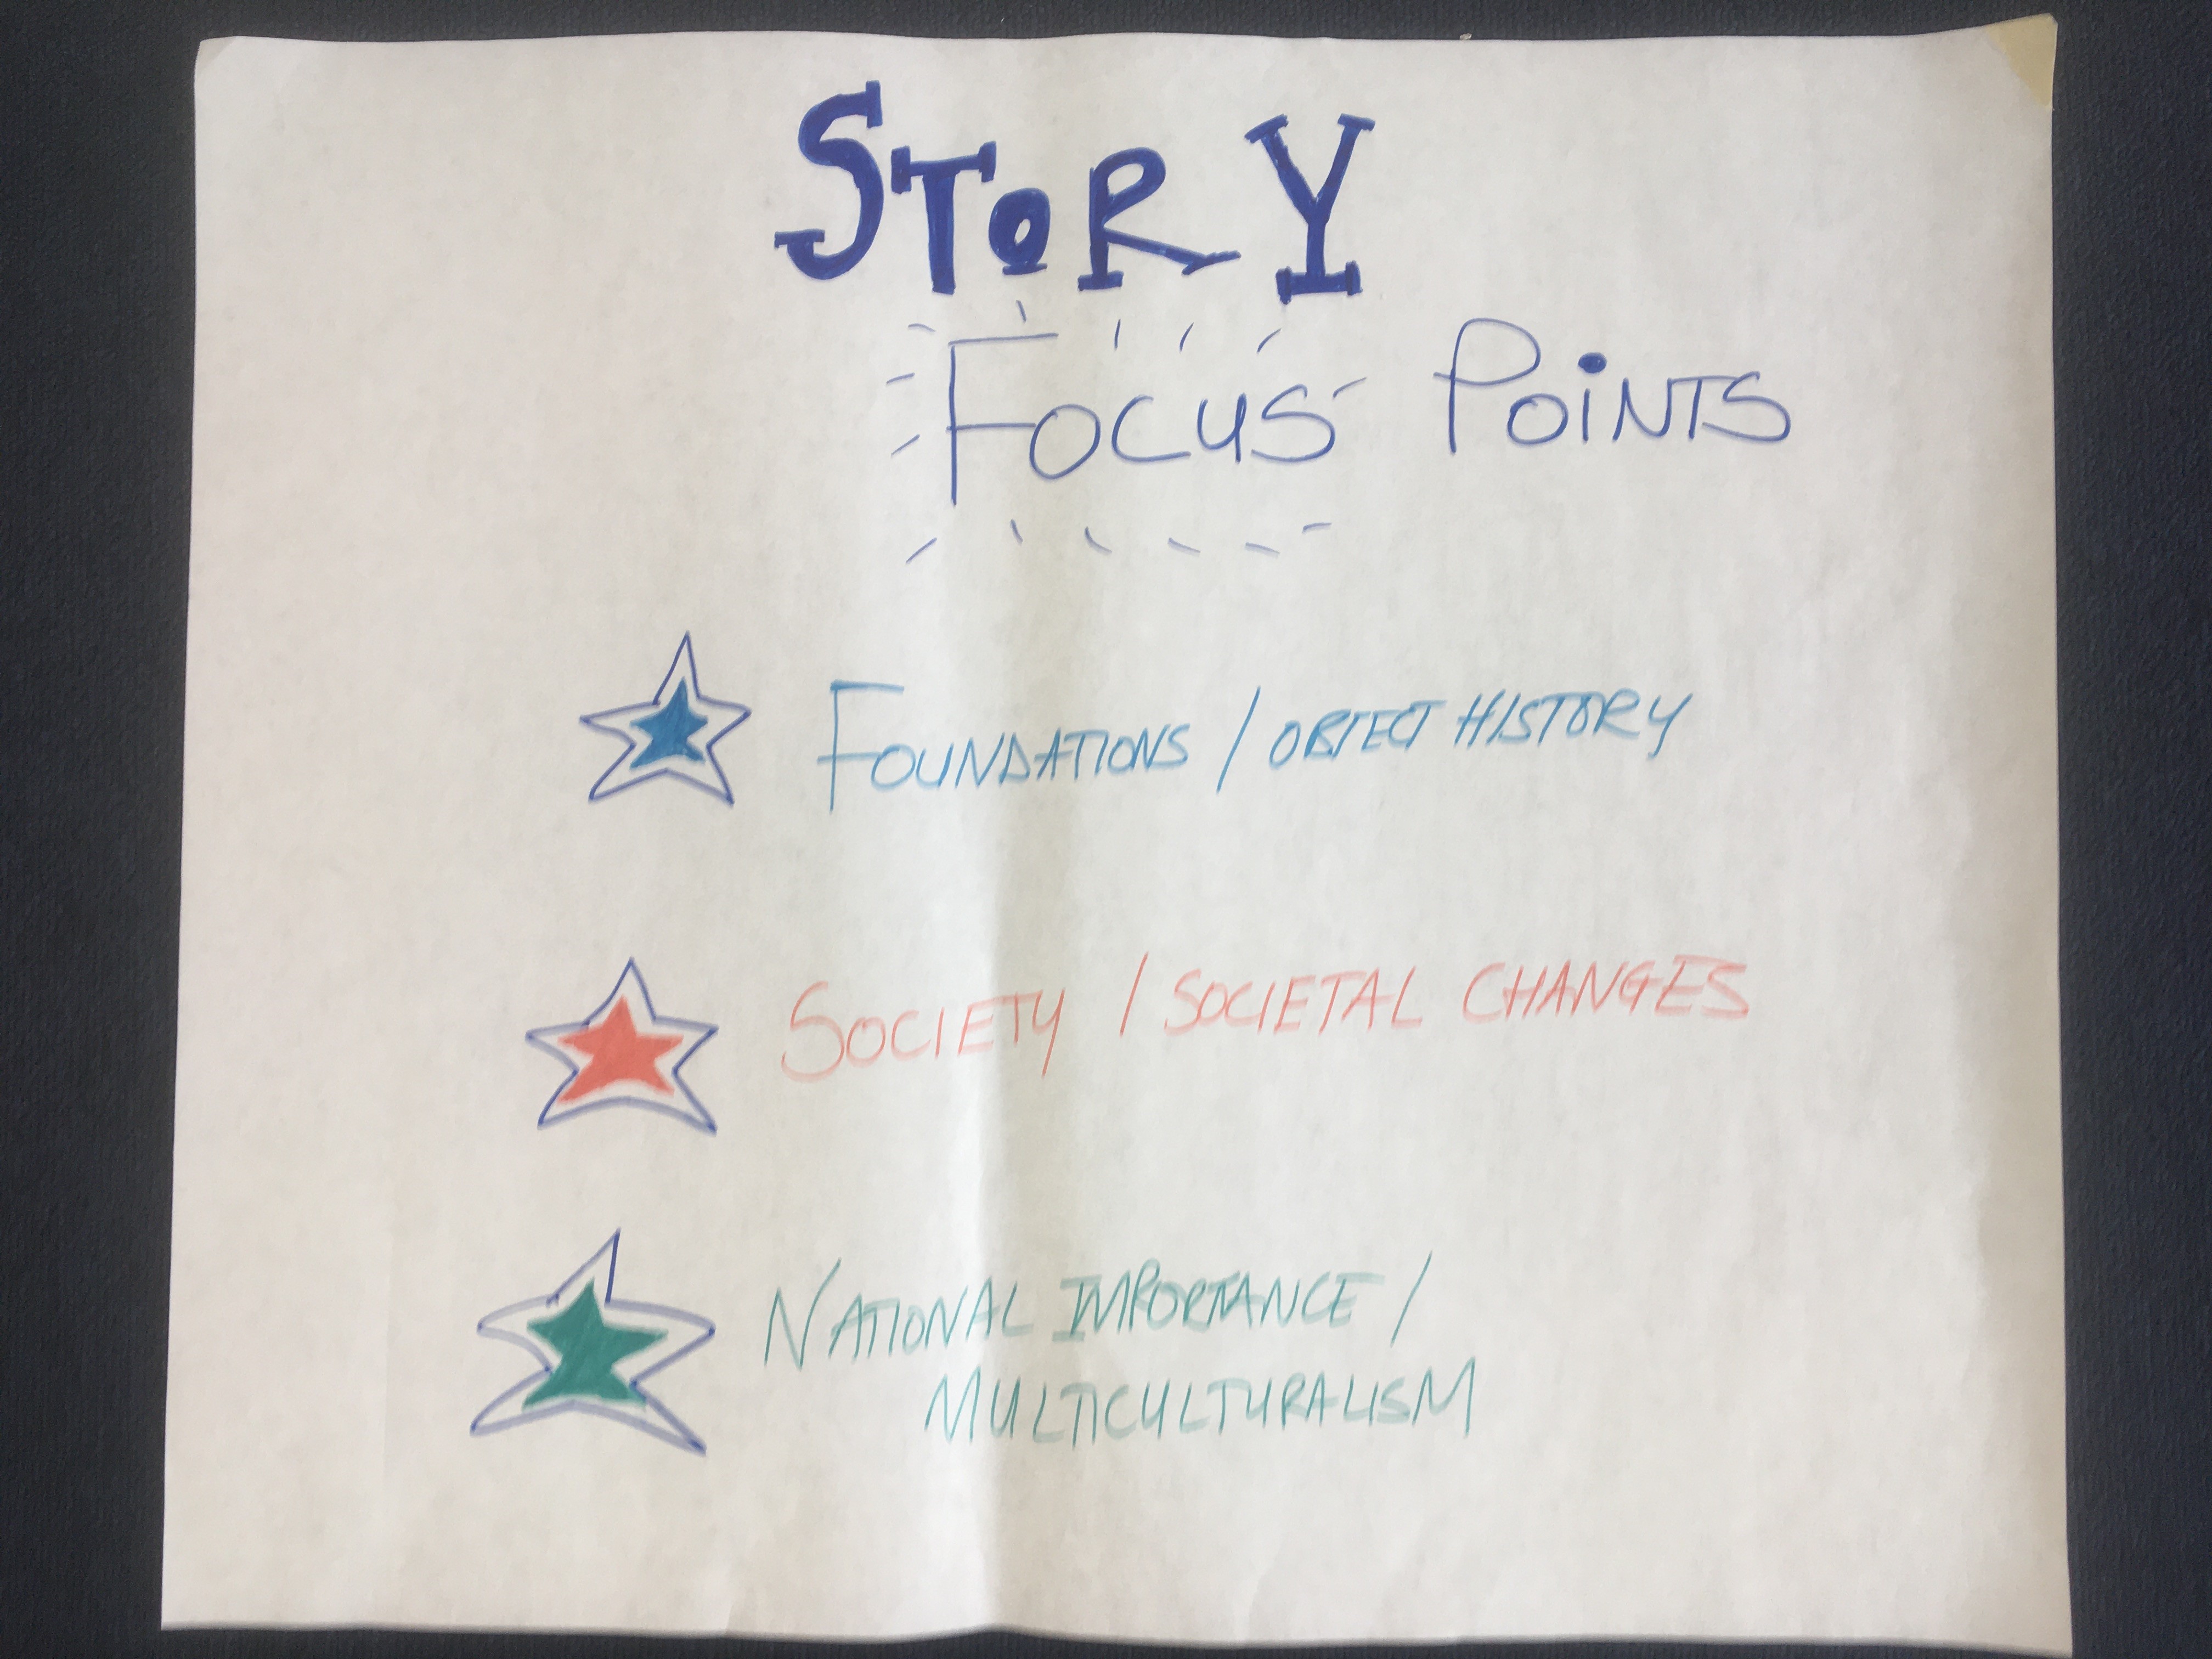 3. Story Focus Points